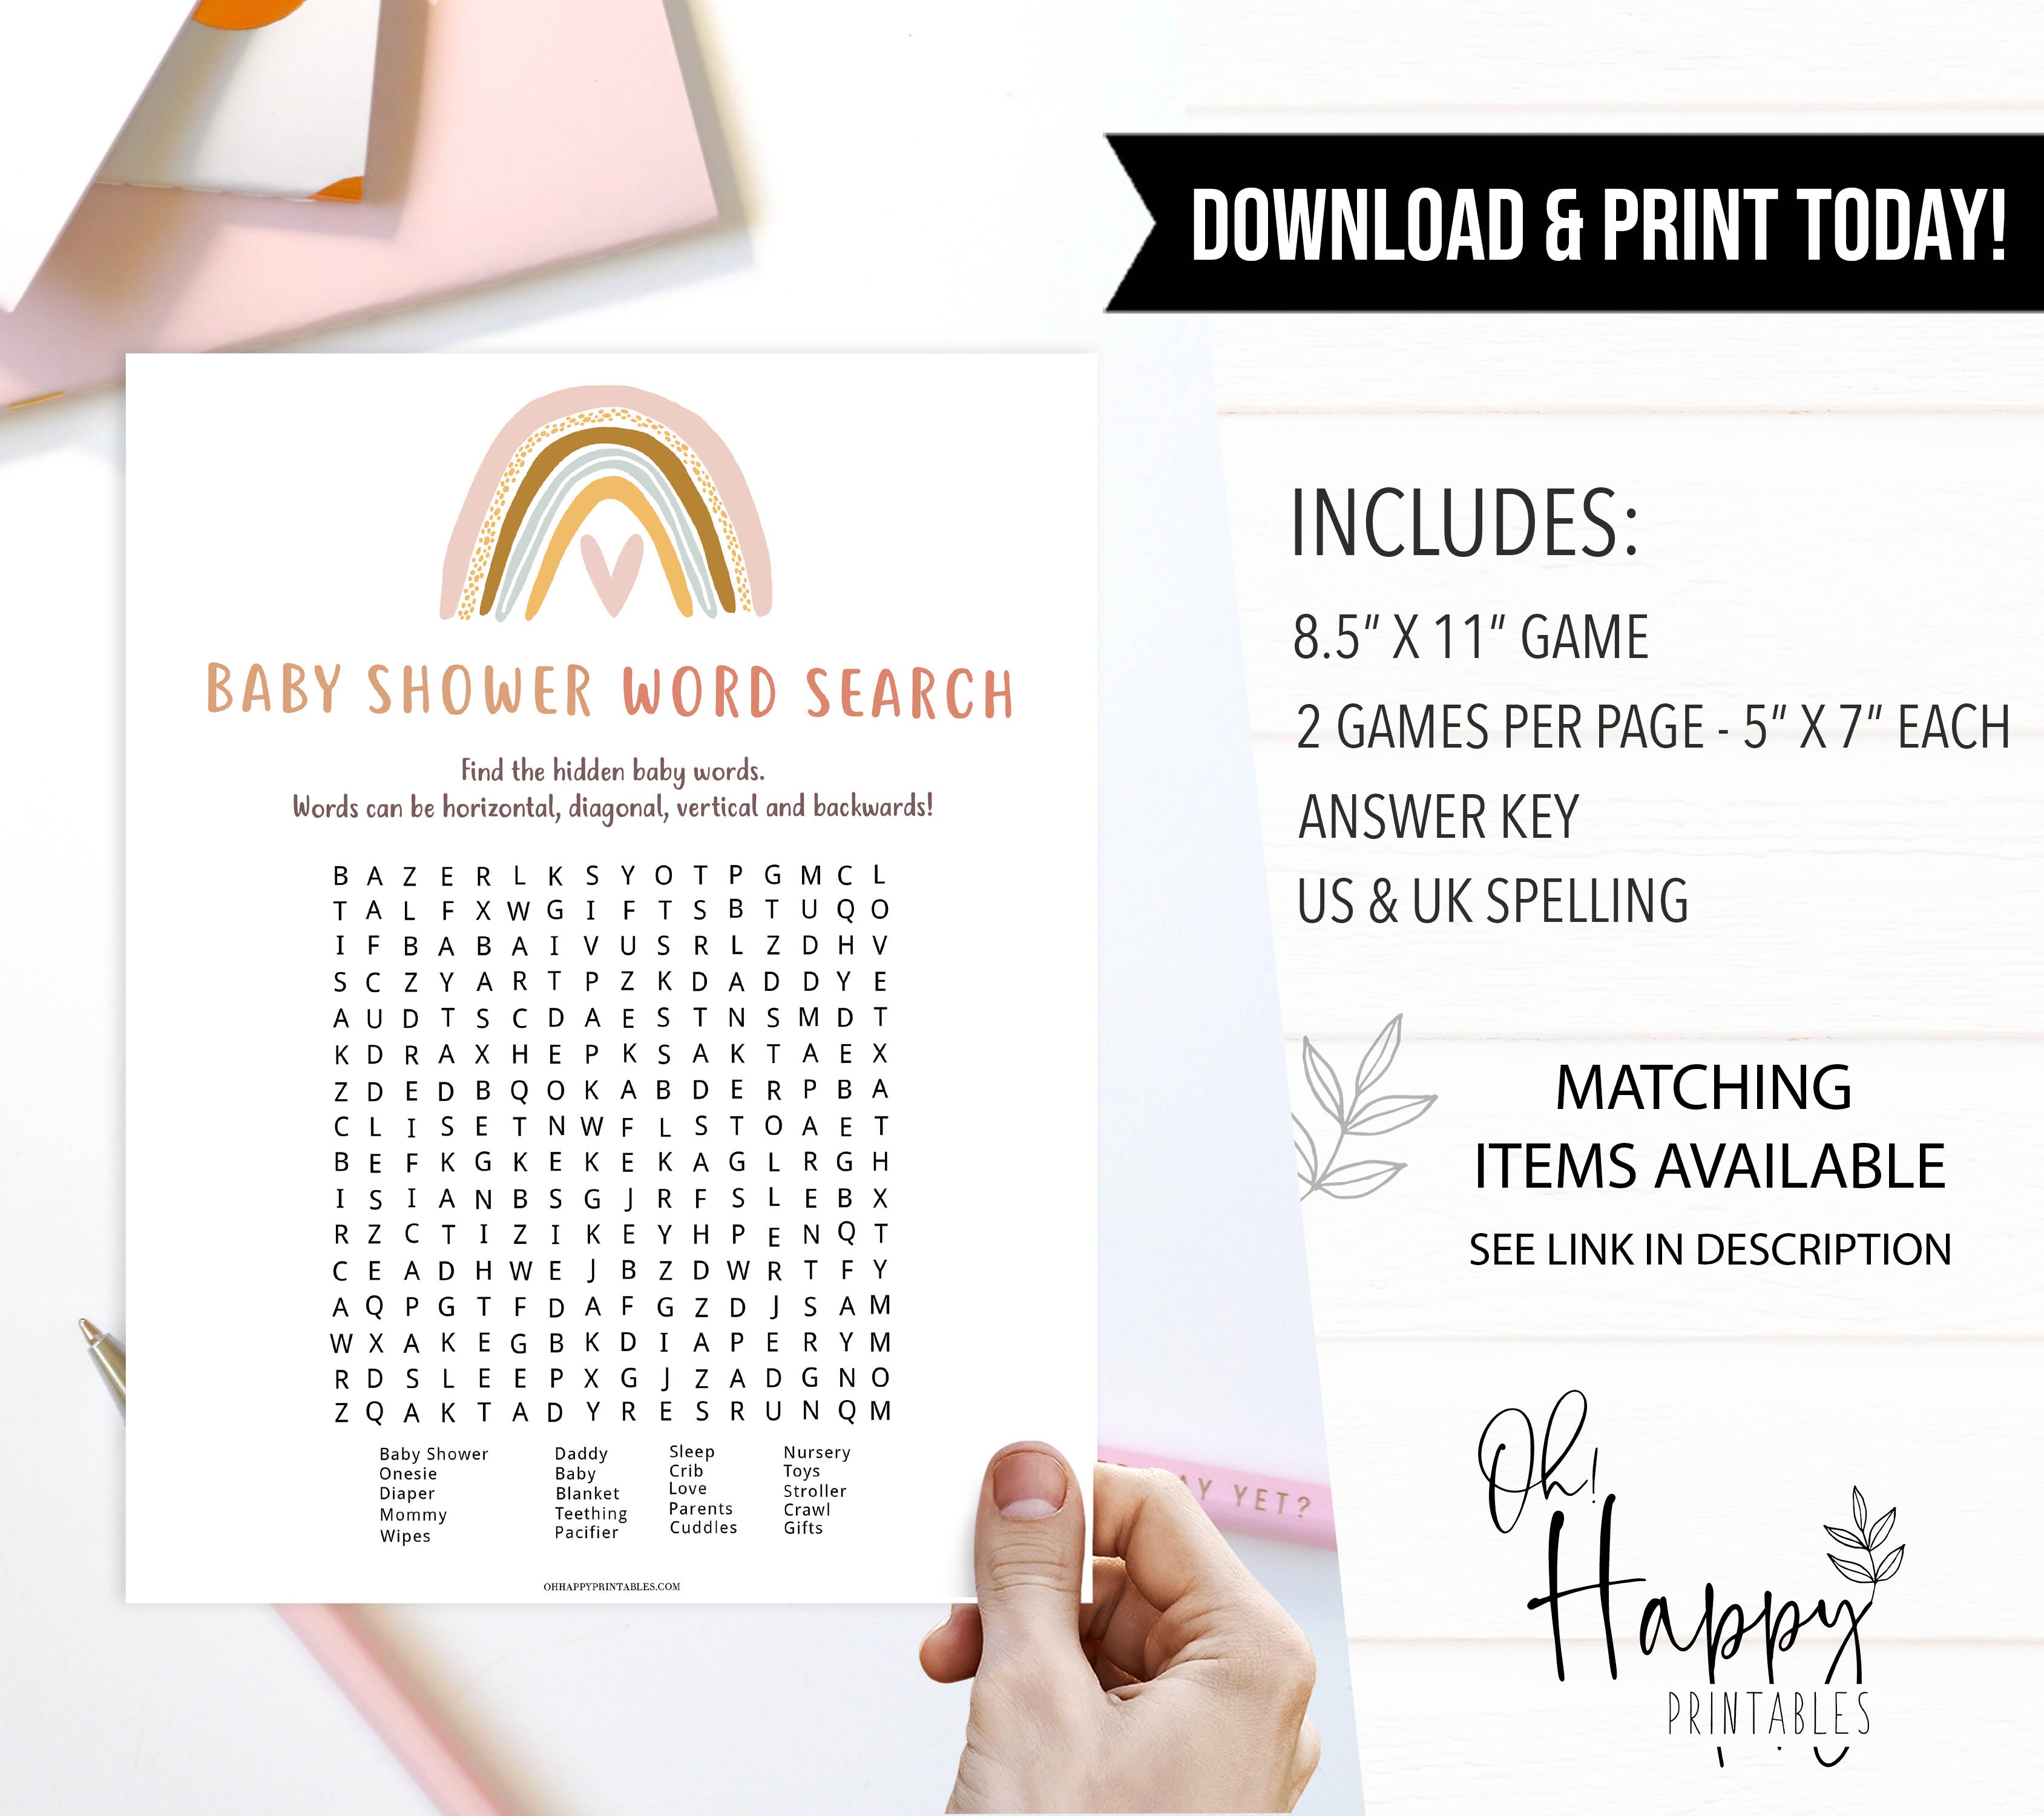 baby shower word search game, Printable baby shower games, boho rainbow baby games, baby shower games, fun baby shower ideas, top baby shower ideas, boho rainbow baby shower, baby shower games, fun boho rainbow baby shower ideas